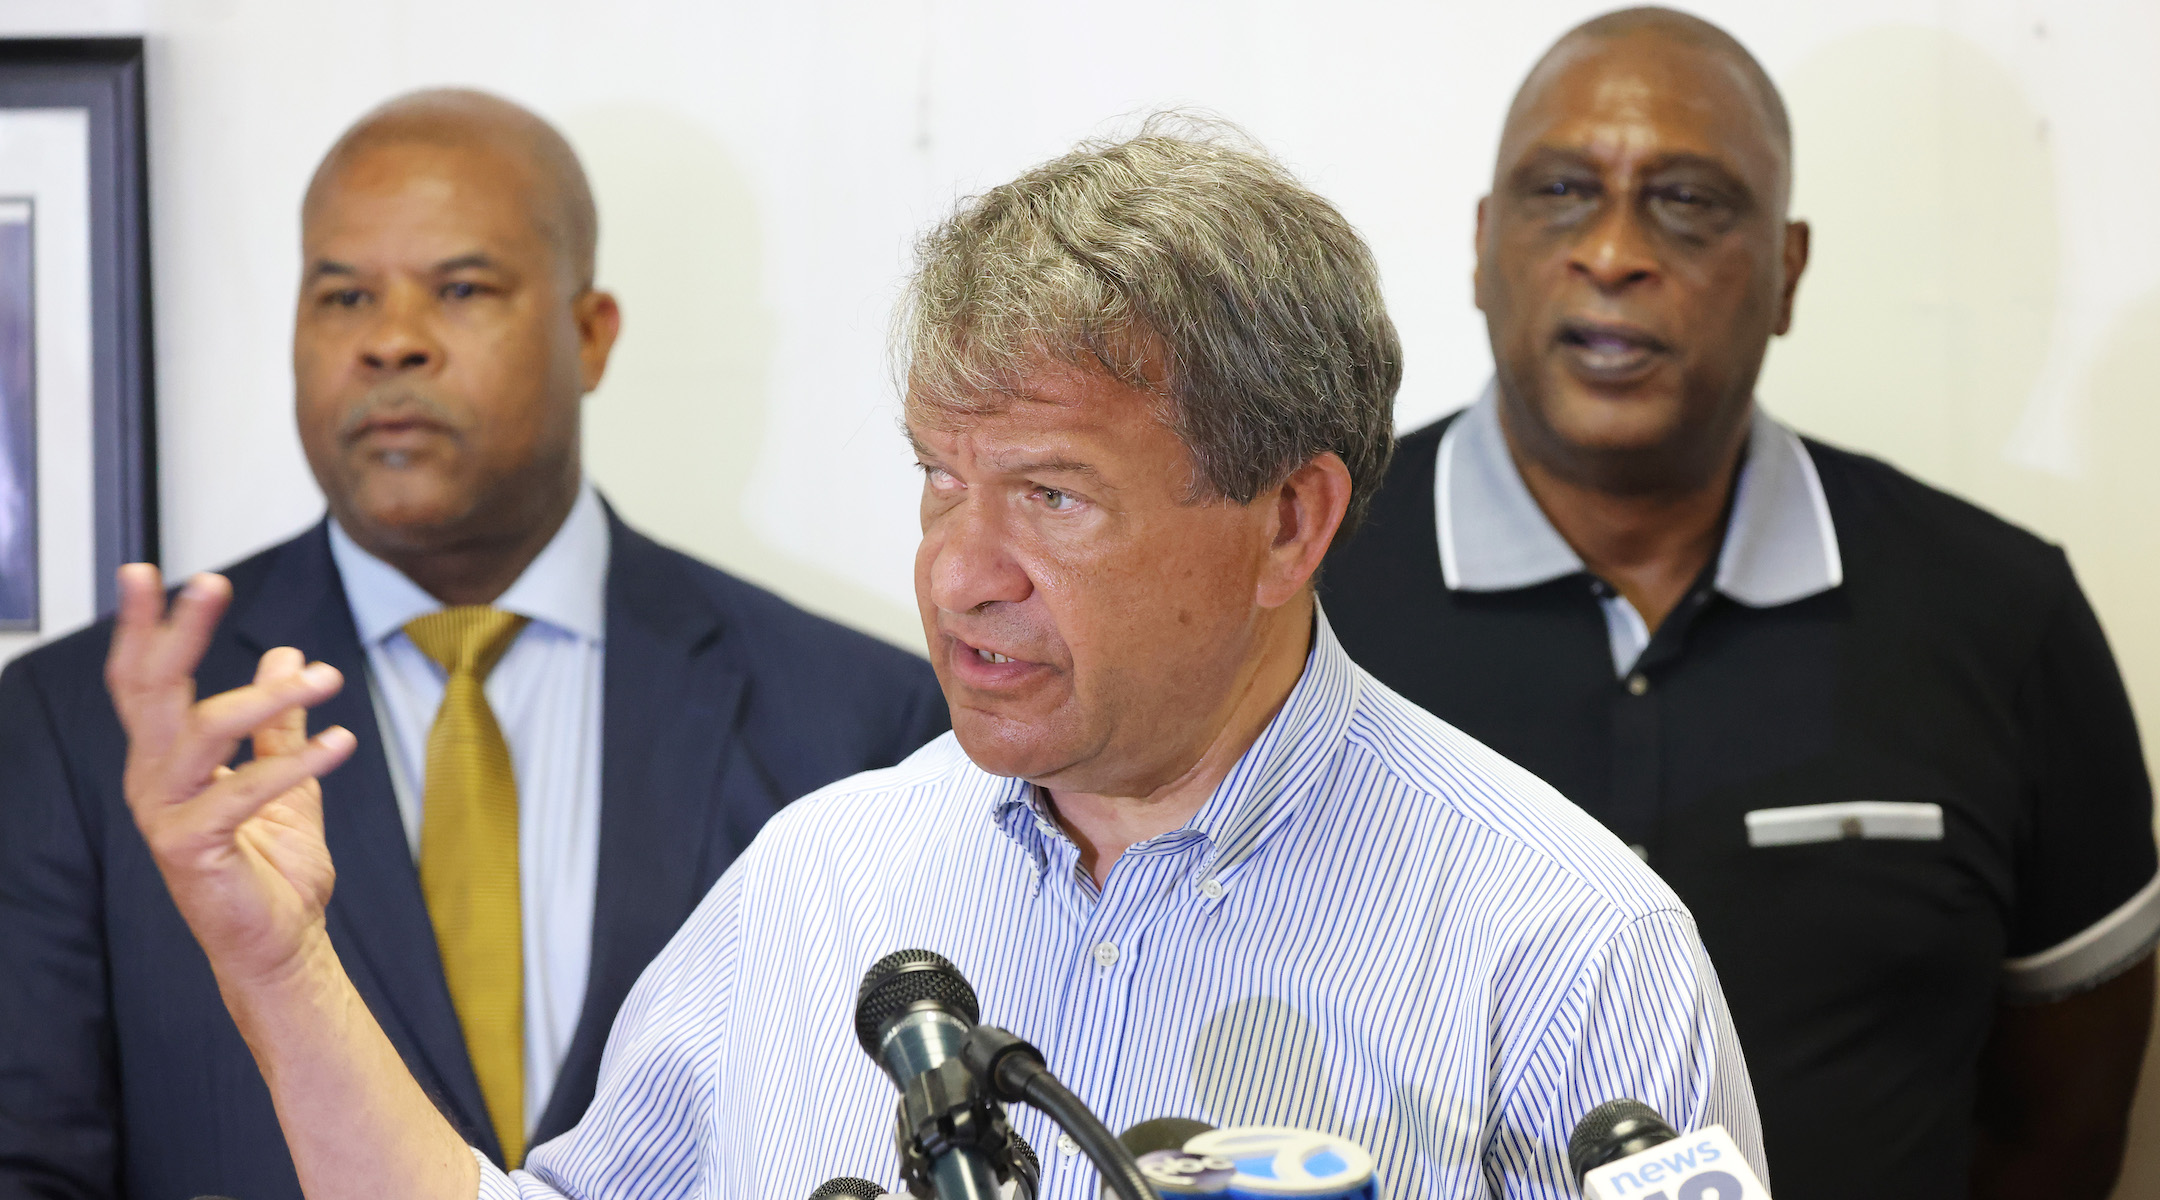 George Latimer speaks during a press conference at the Mount Vernon Democratic headquarters on June 24, 2024. (Michael M. Santiago/Getty Images)